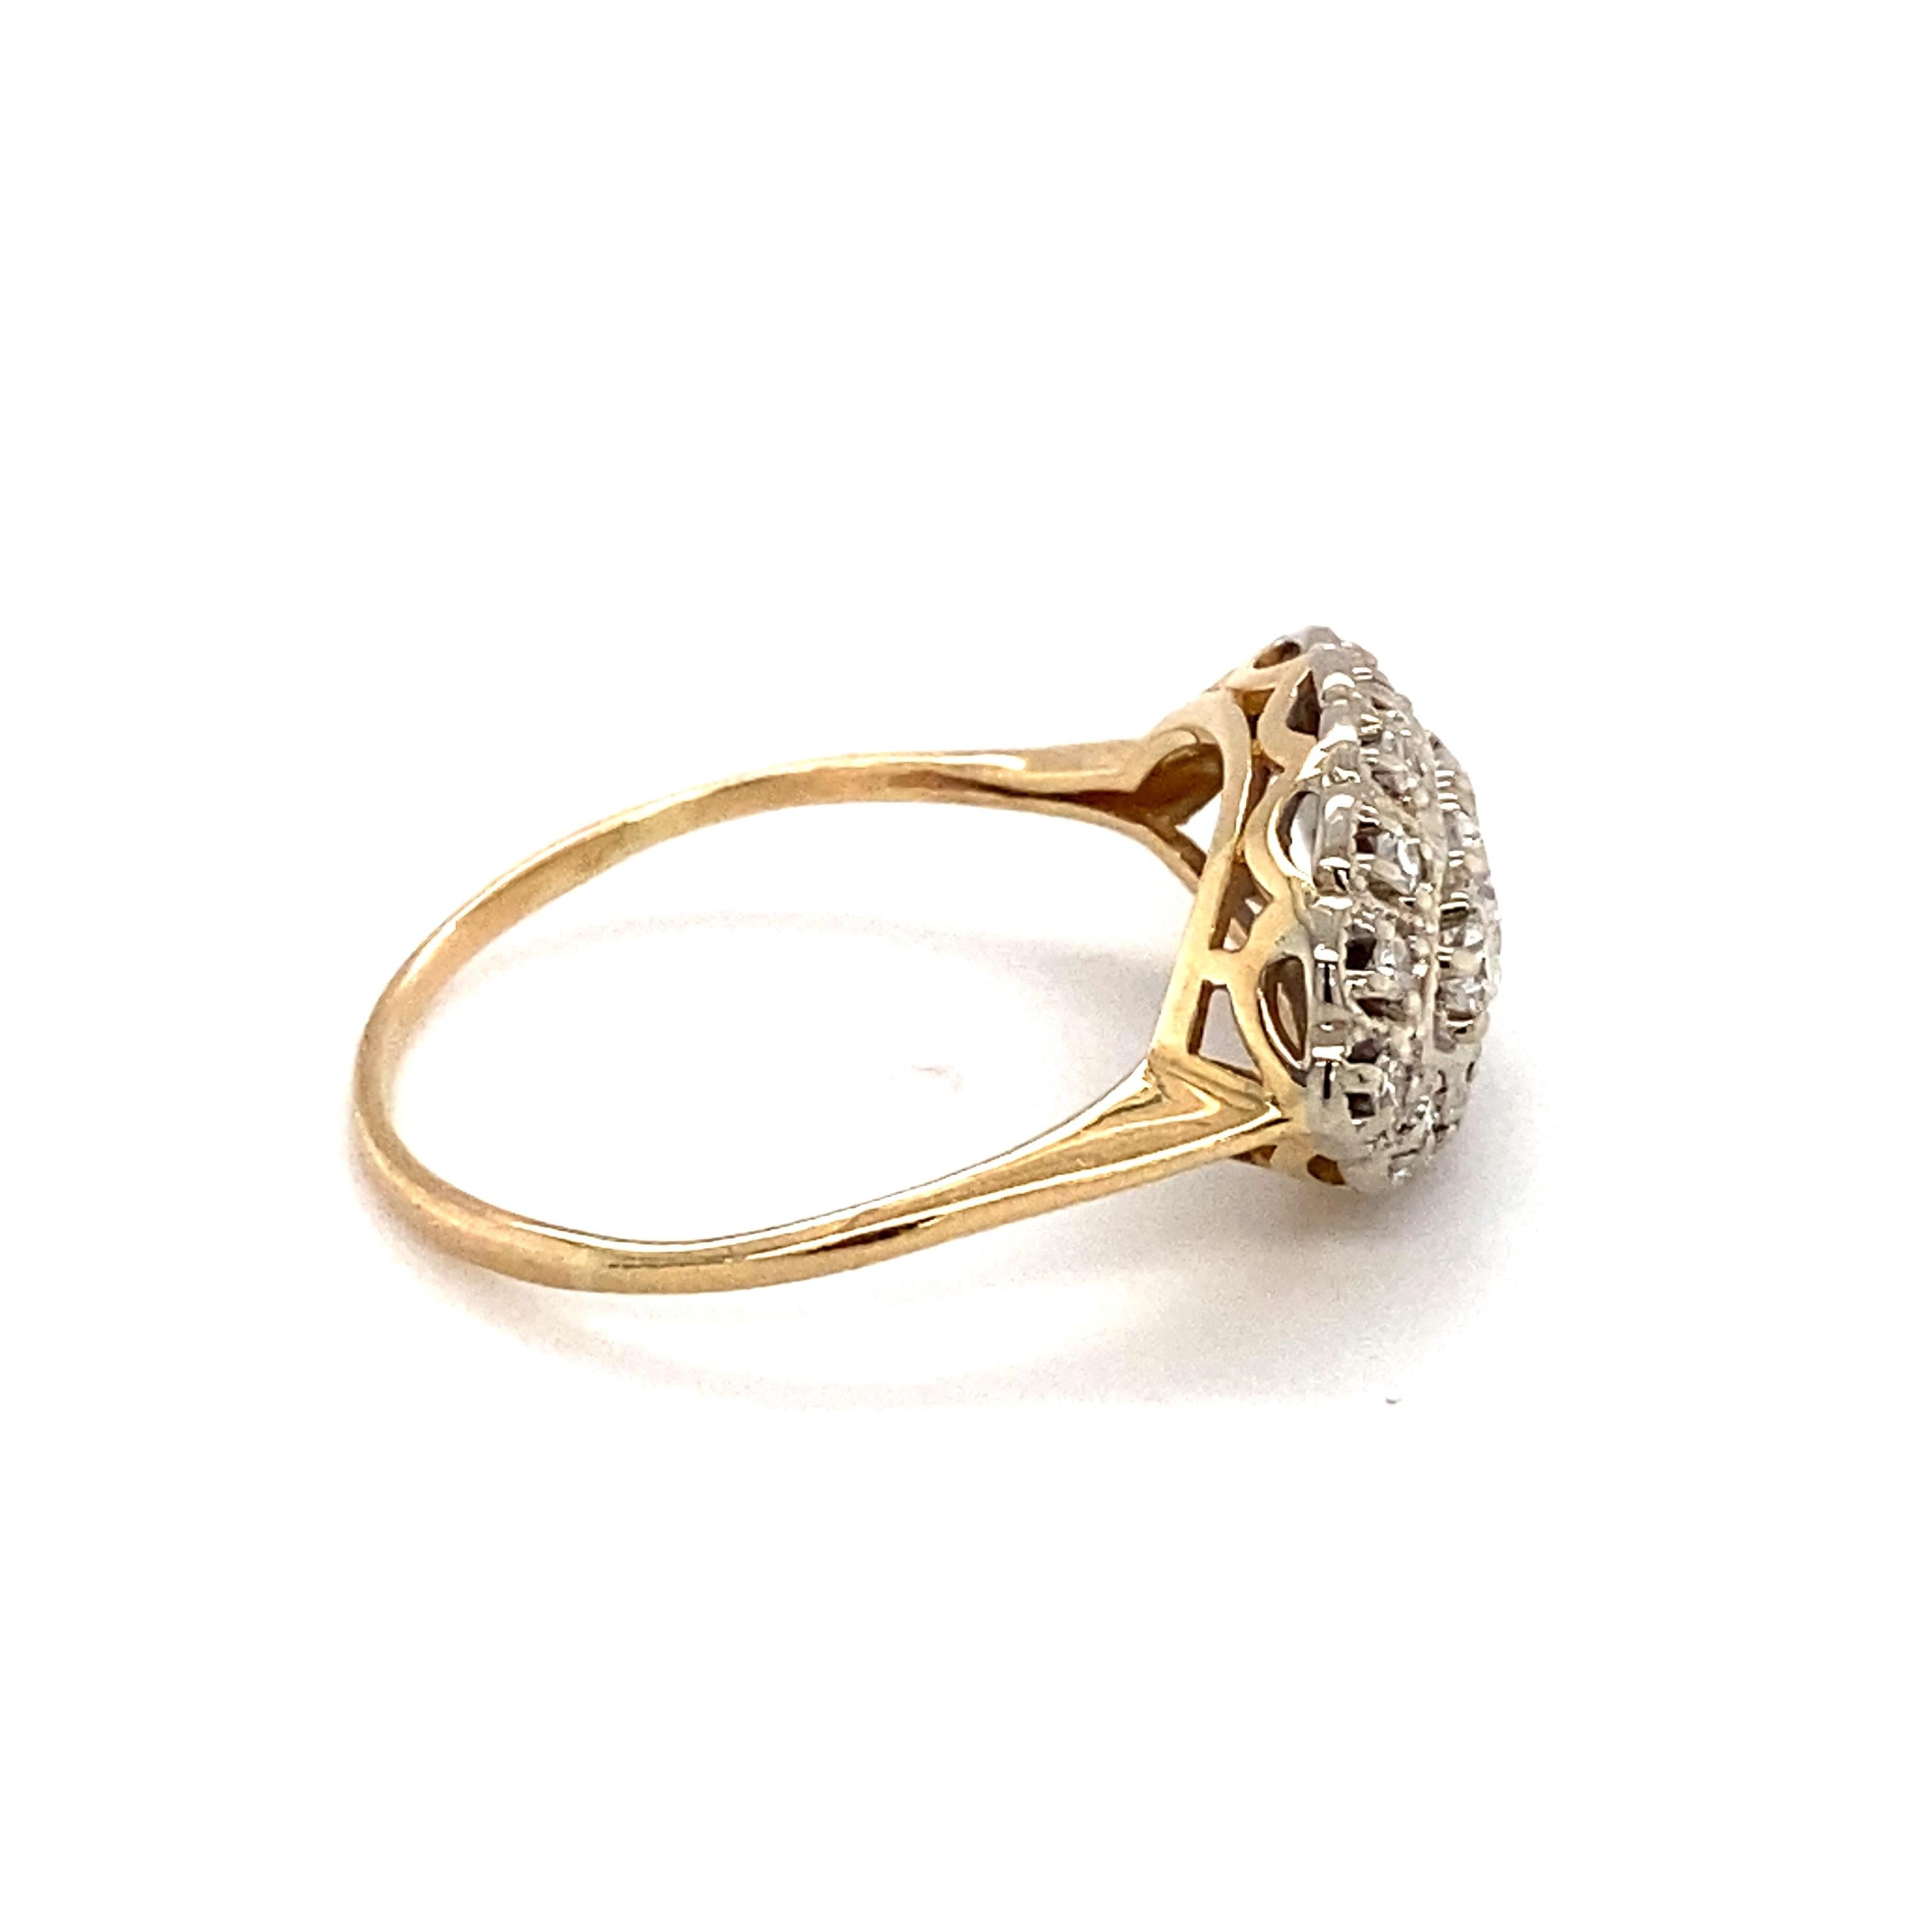 Circa: 1930
Metal Type: 14 Karat White and Yellow Gold
Weight: 4.4 grams
Size: US 10, resizable

Diamond Details:

Carat: 0.25 carat total weight
Shape: Single cut and round diamonds
Color: G/H
Clarity: VS
 